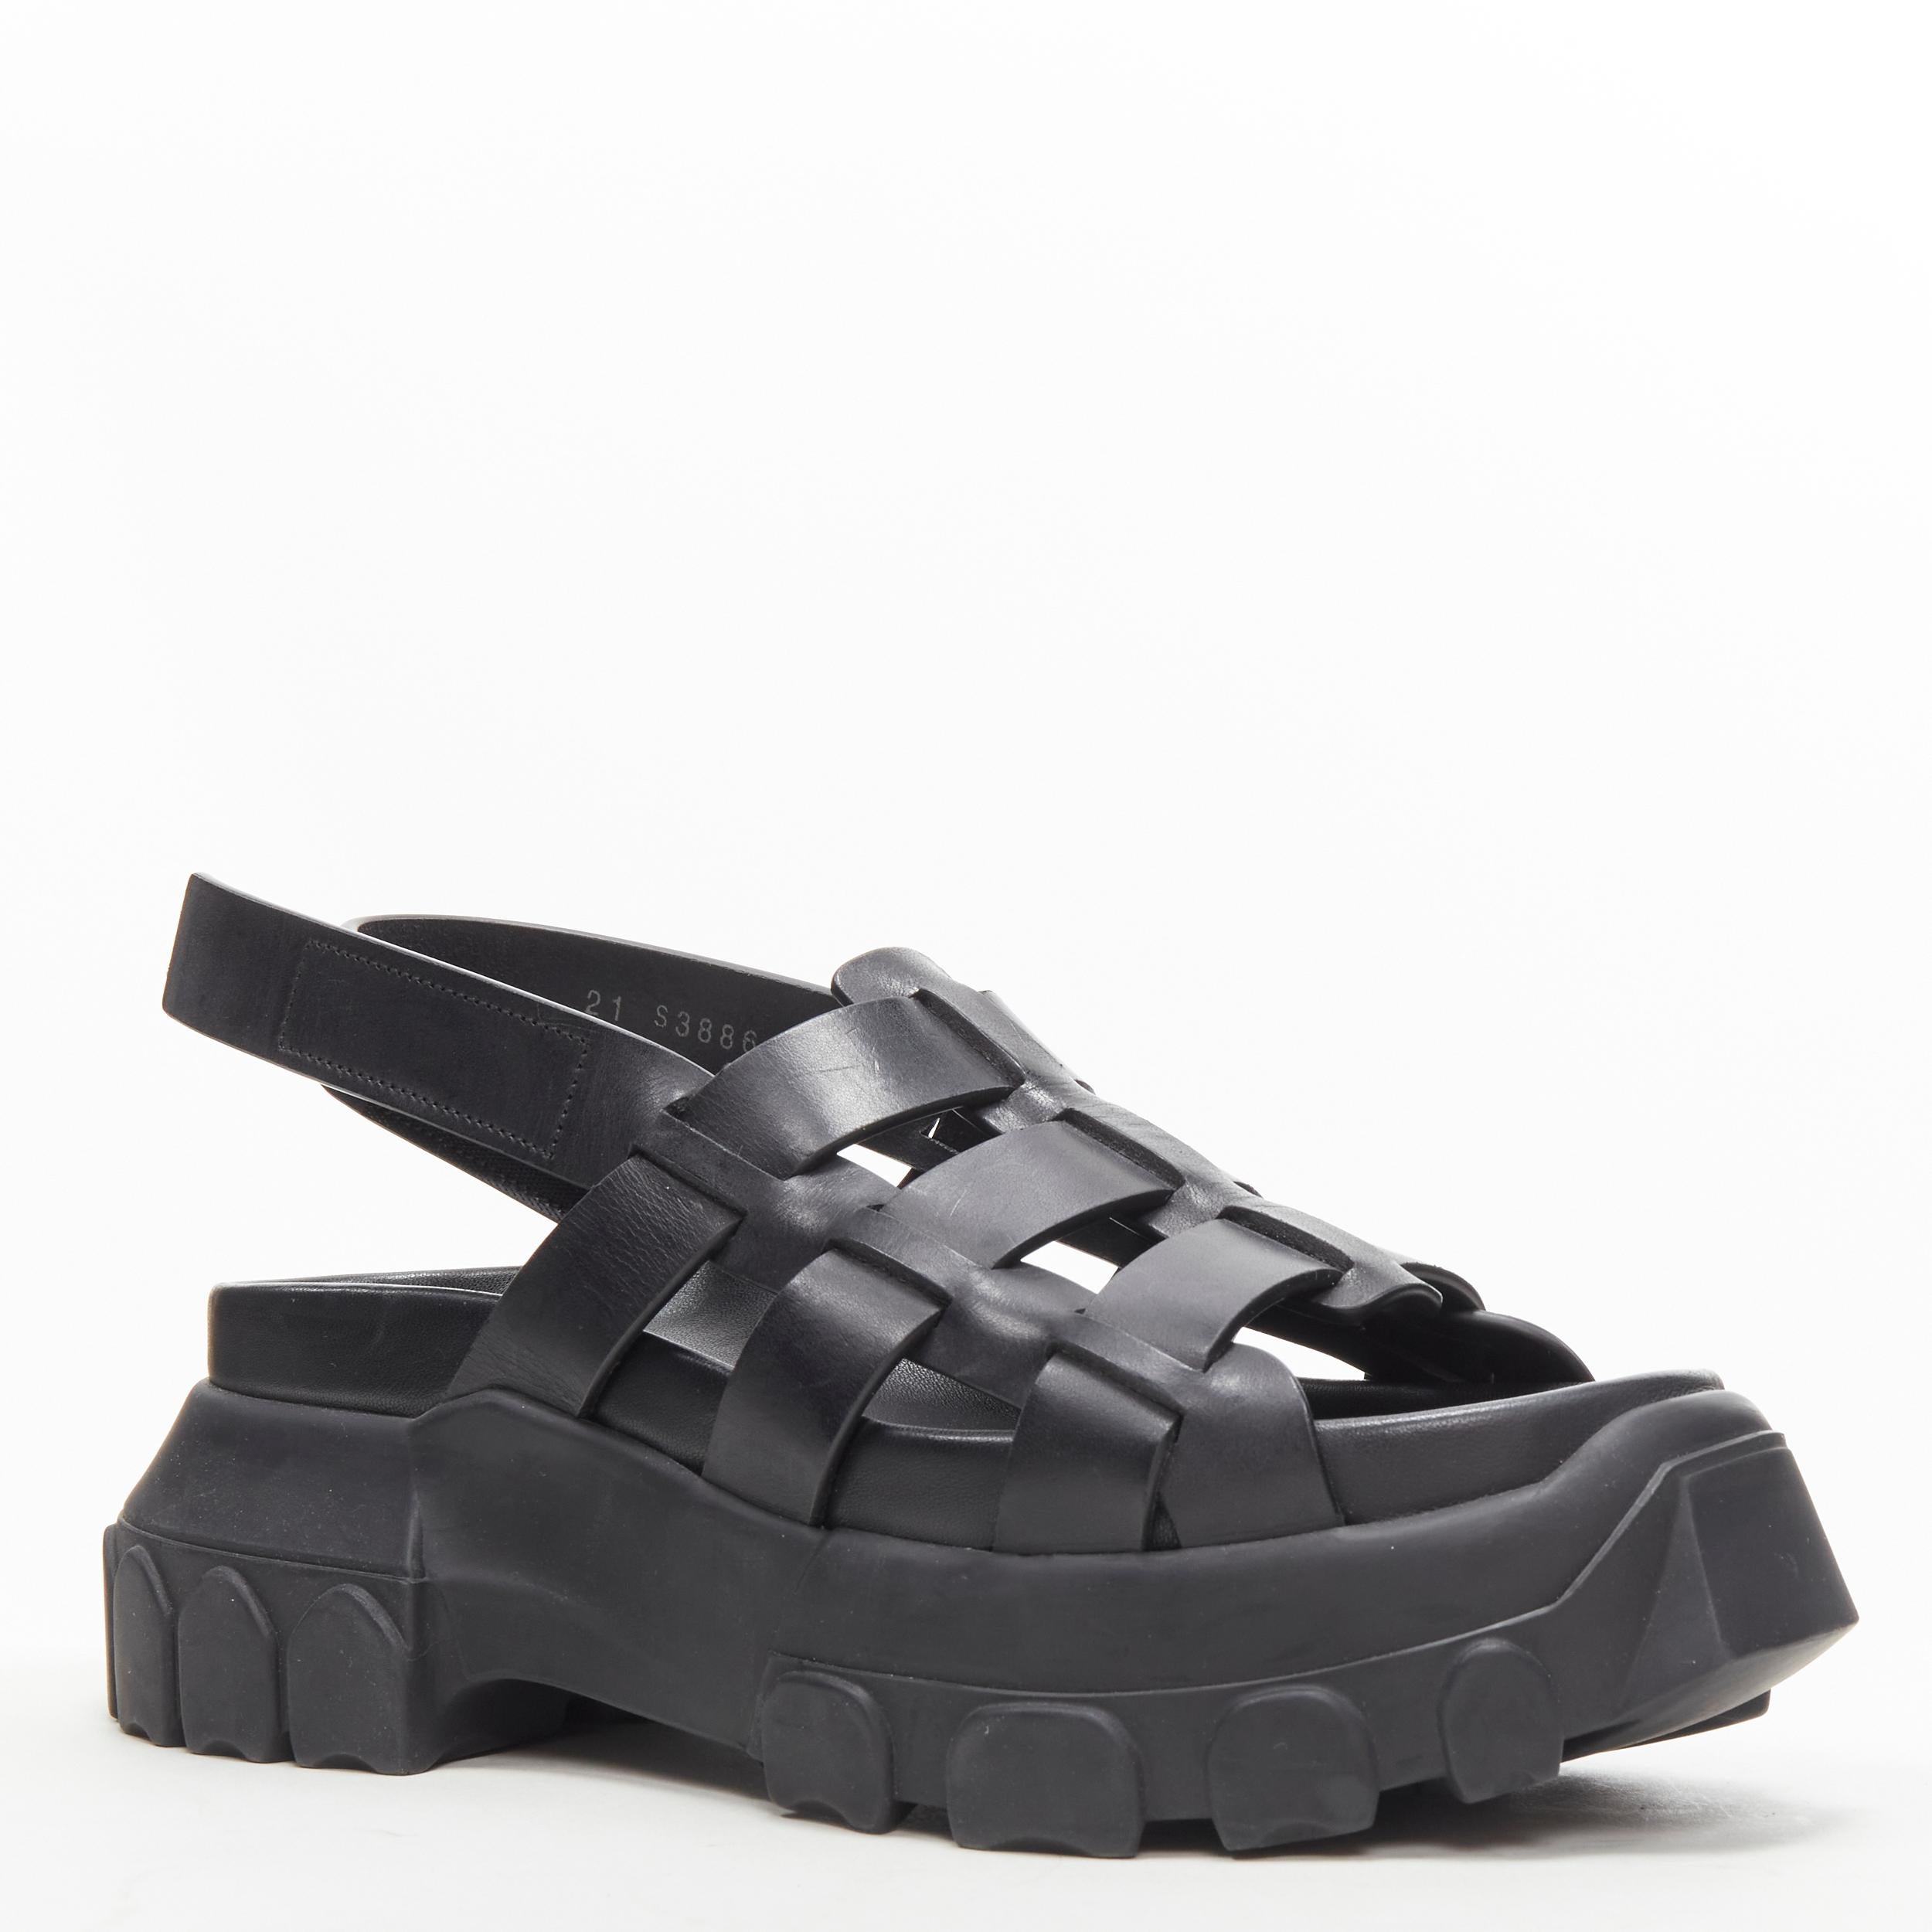 new RICK OWENS Hiking Sandal black track sole platform sandal EU38 
Reference: TGAS/C00633 
Brand: Rick Owens 
Model: Hiking Sandal 
Material: Leather 
Color: Black Pattern: Solid Closure: Magic Tape 
Estimated Retail Price: US $1320 
Made in: Italy